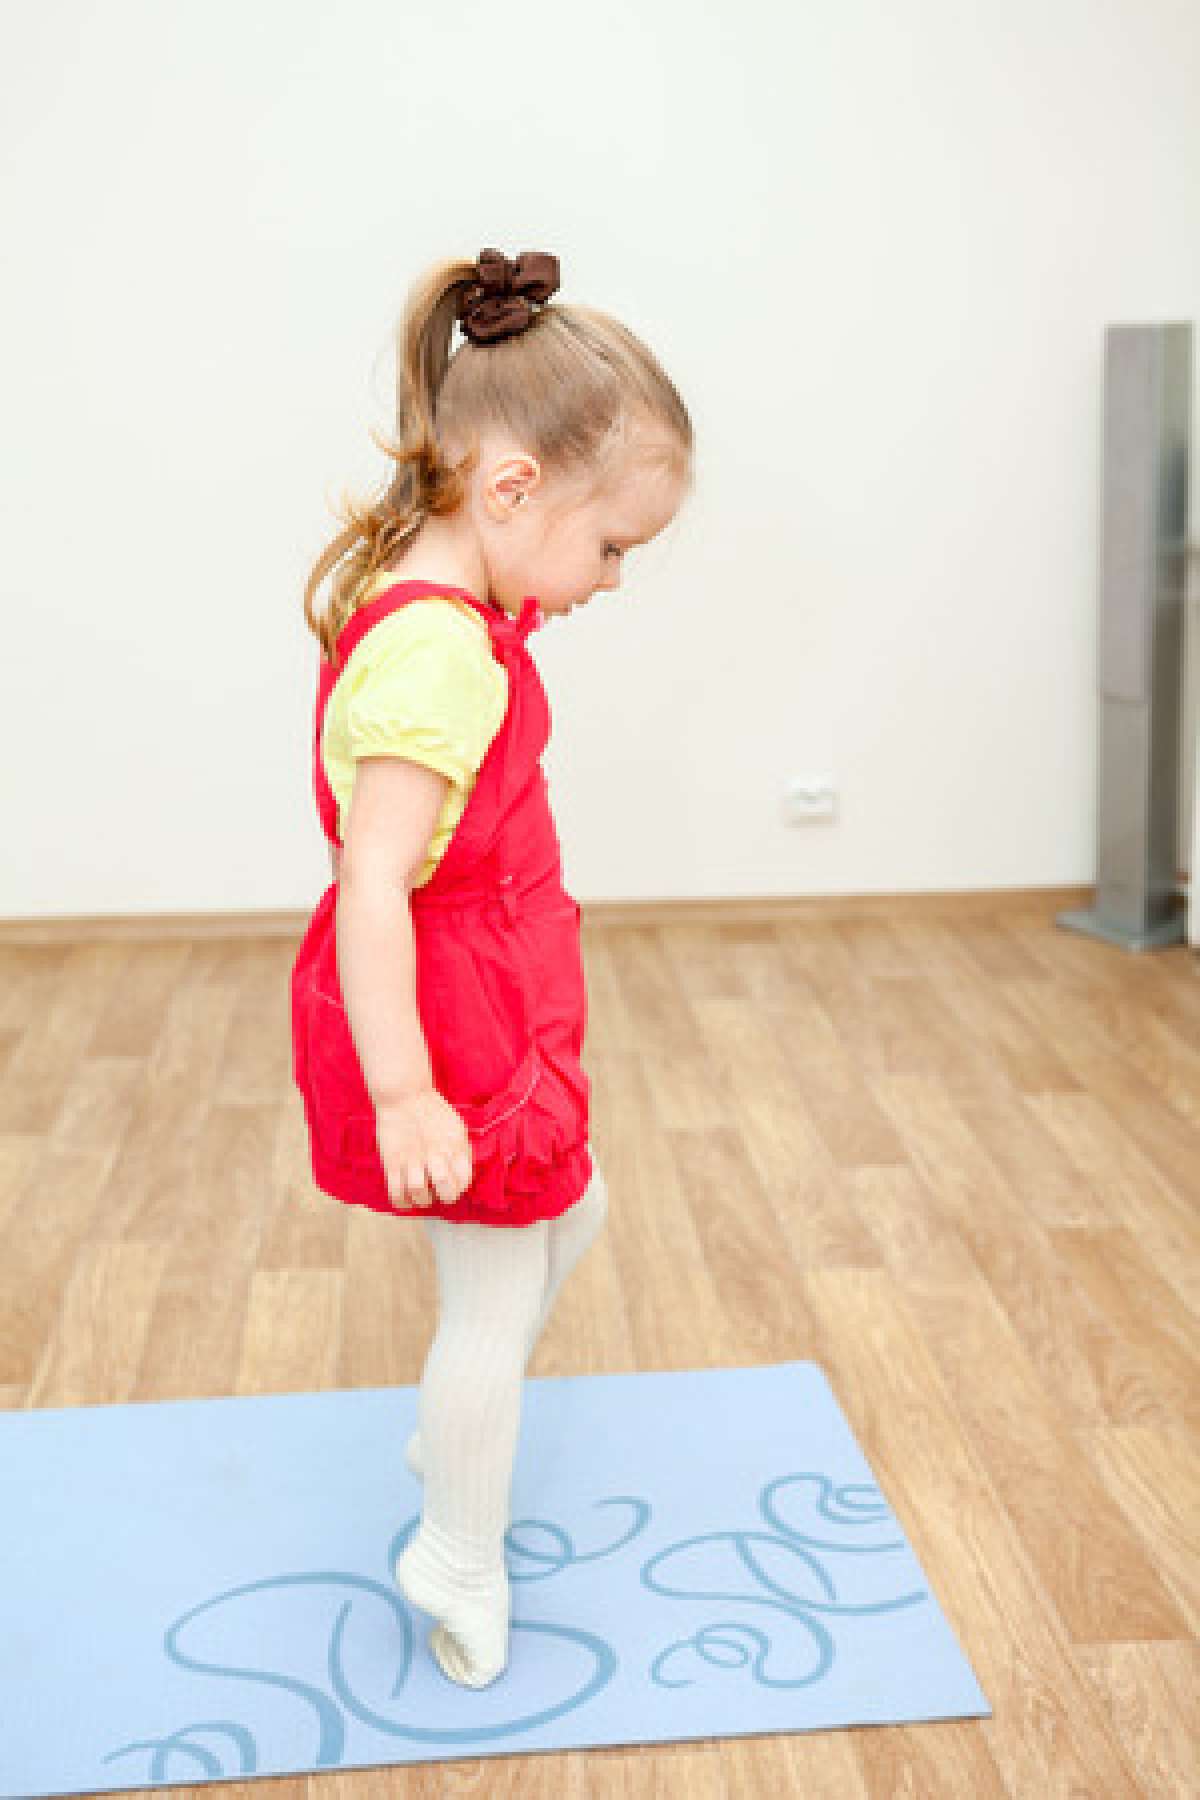 Movement Activity for Kids